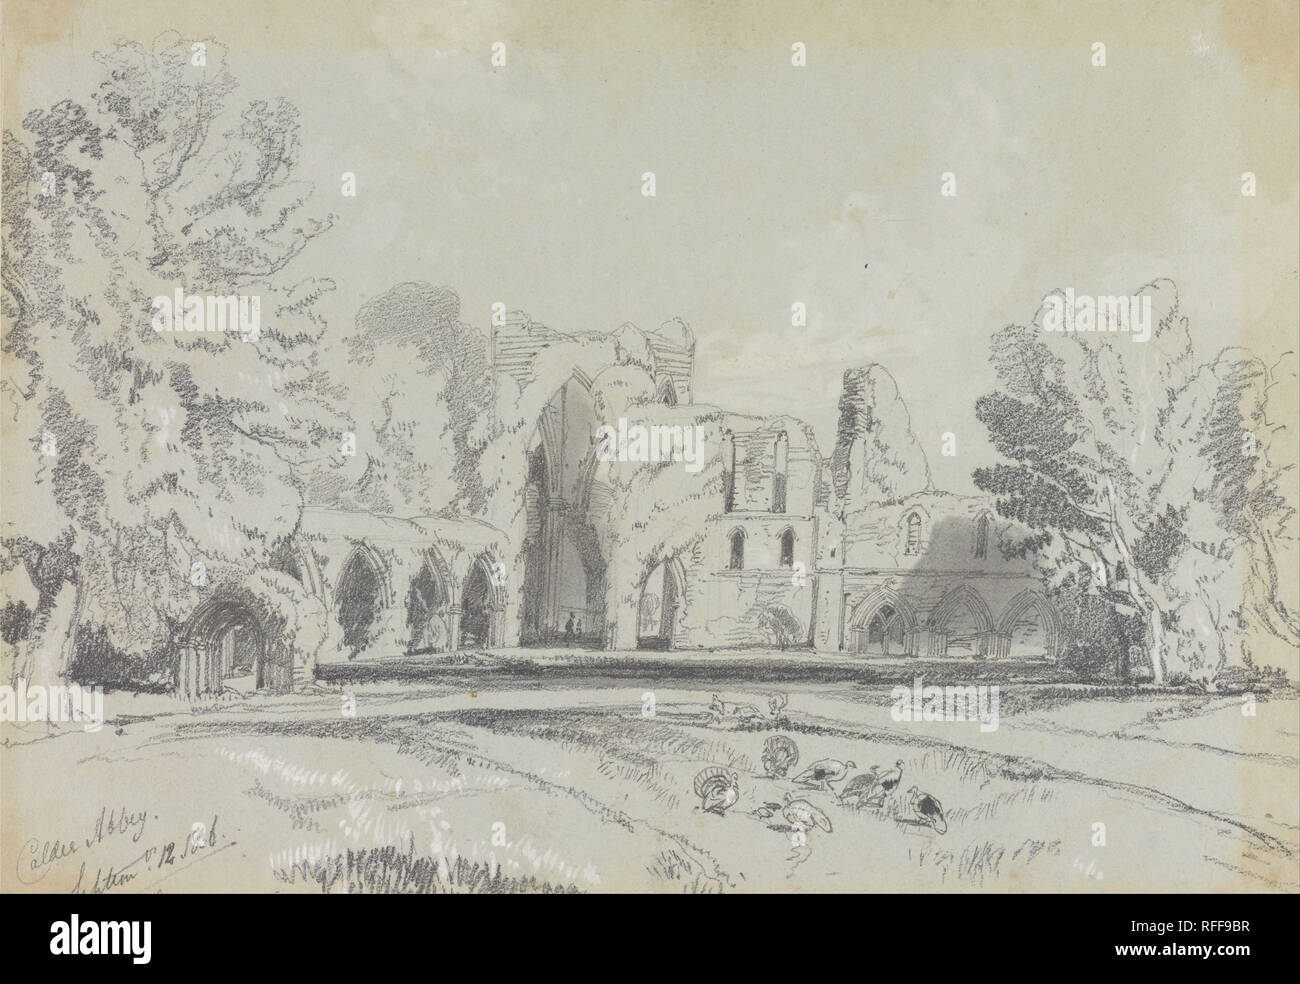 Calder Abbey, September 12. 1836. Date/Period: 1836. Drawing. Graphite with stumping and gouache on moderately thick, moderately textured, gray wove paper. Height: 232 mm (9.13 in); Width: 333 mm (13.11 in). Author: Edward Lear. Stock Photo